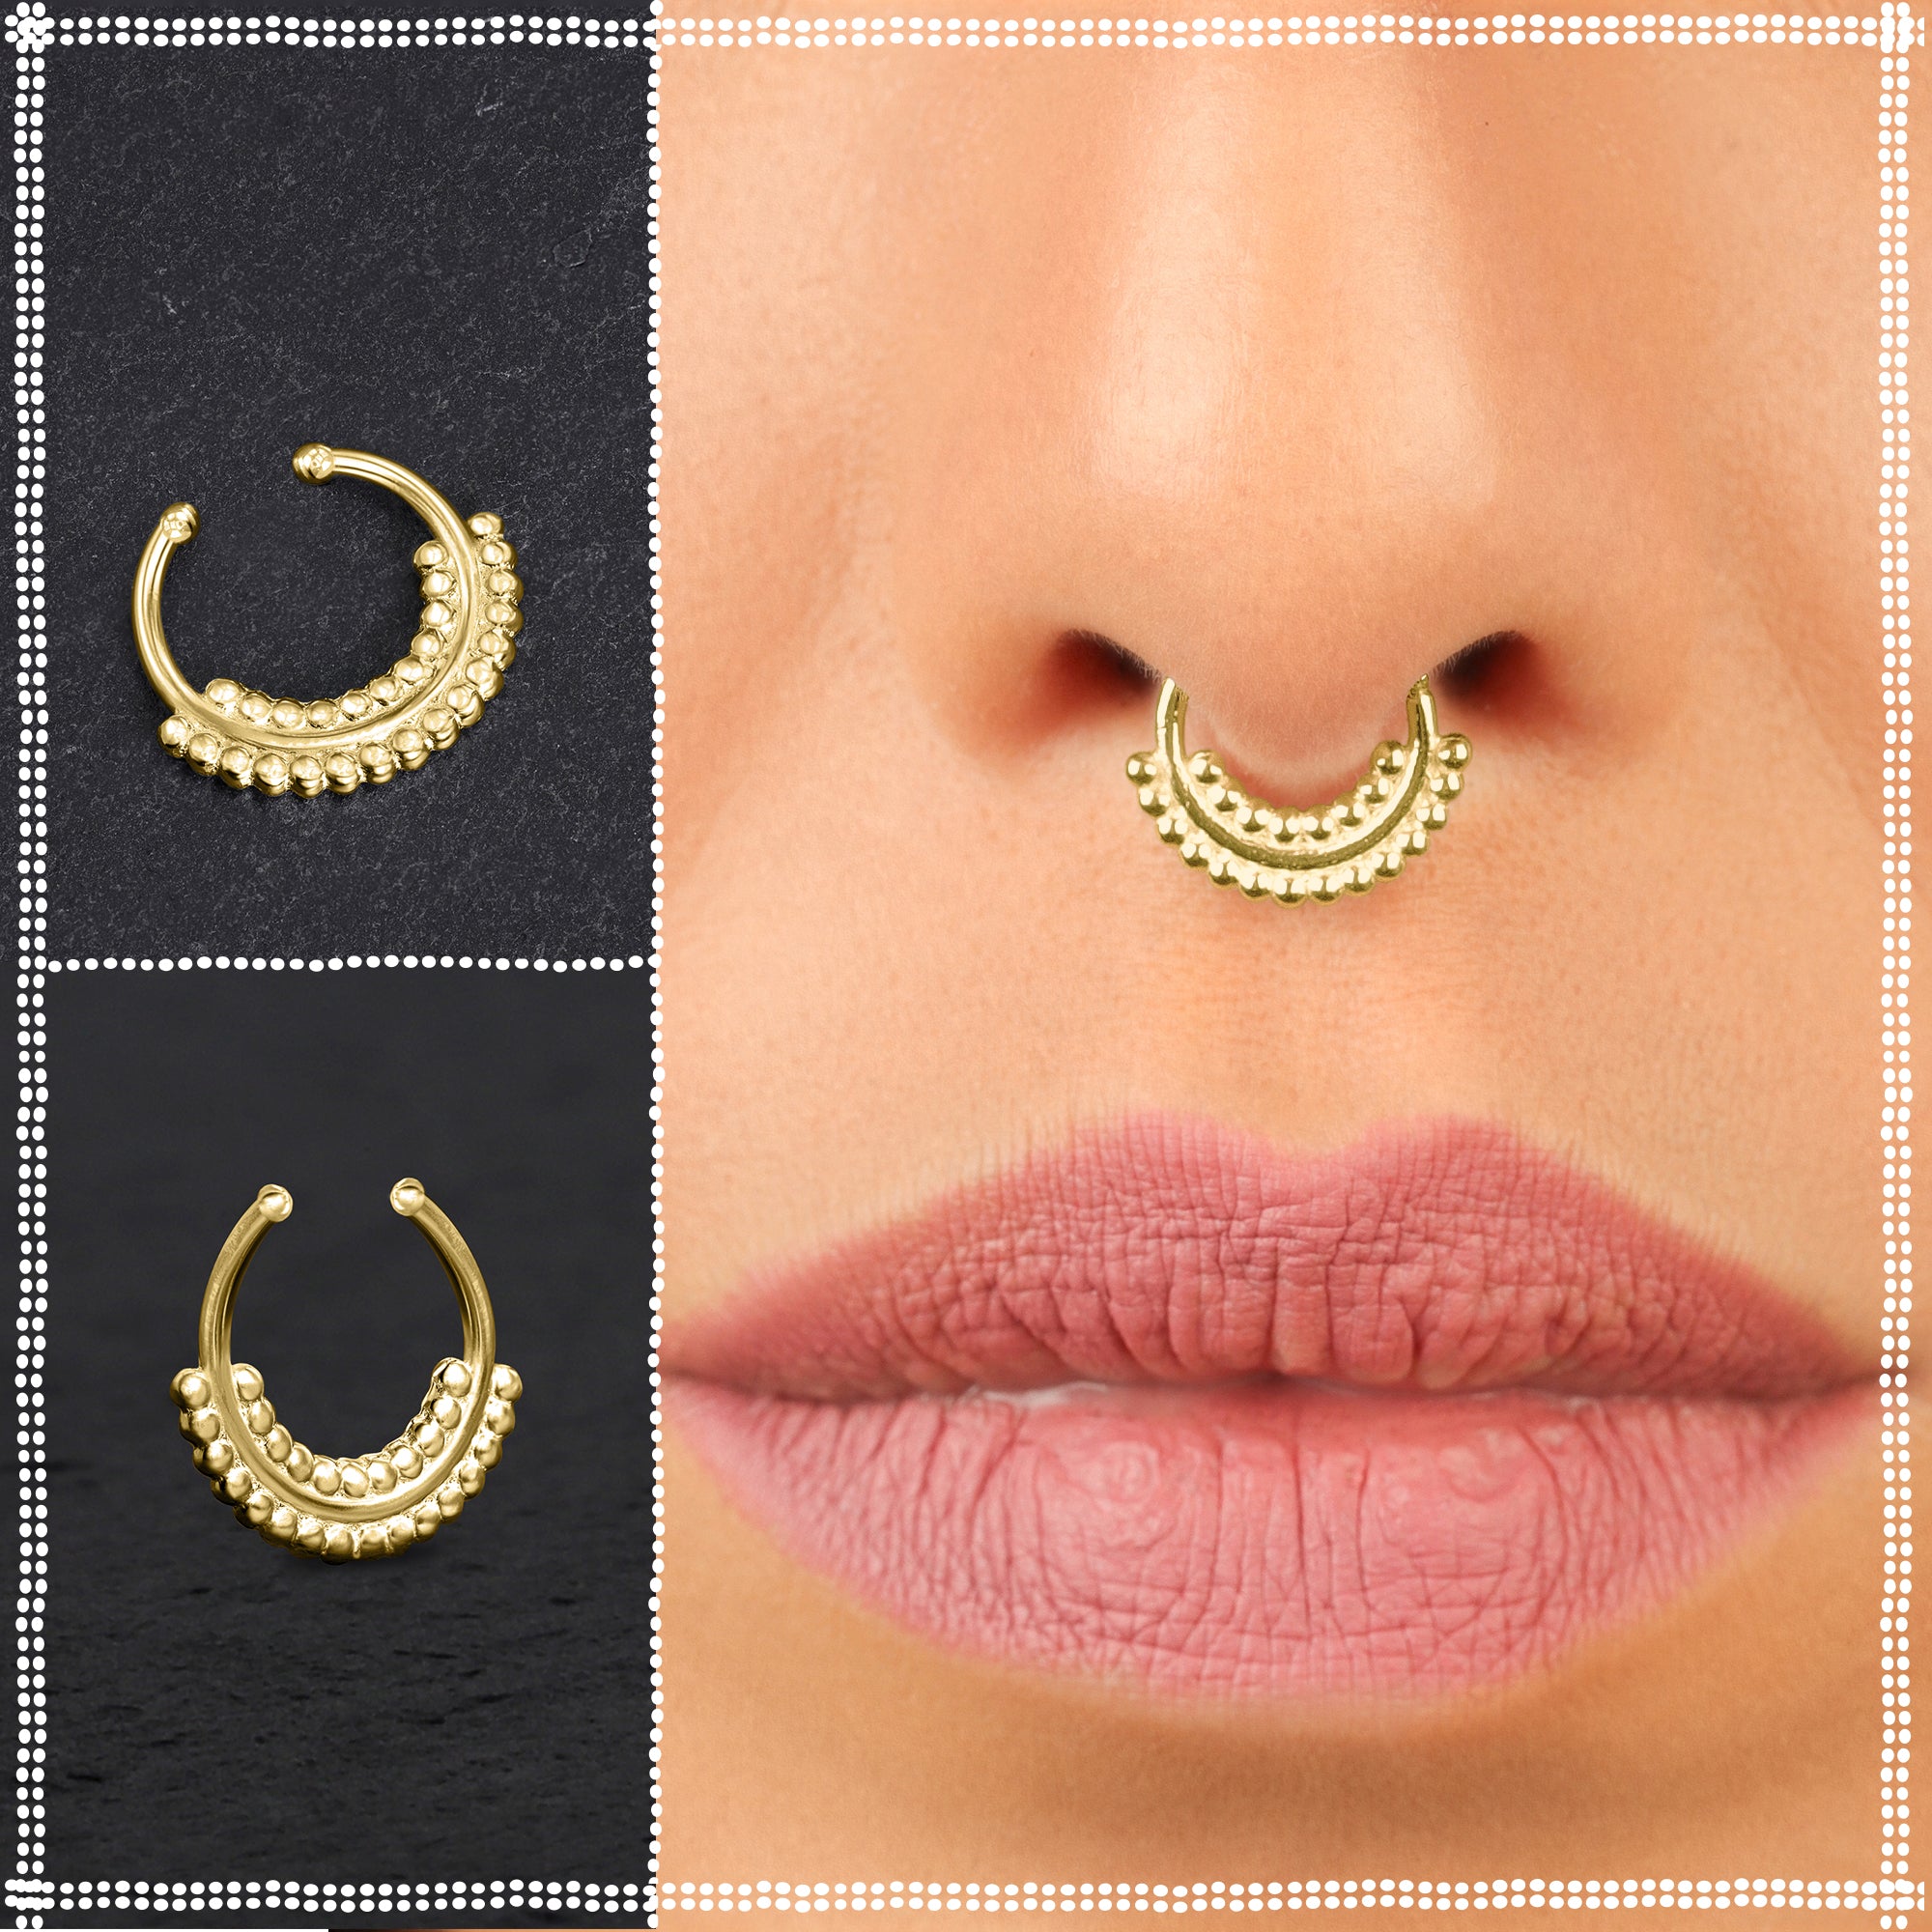 10kt Solid Yellow Gold Nose Ring With U-Post - Walmart.com